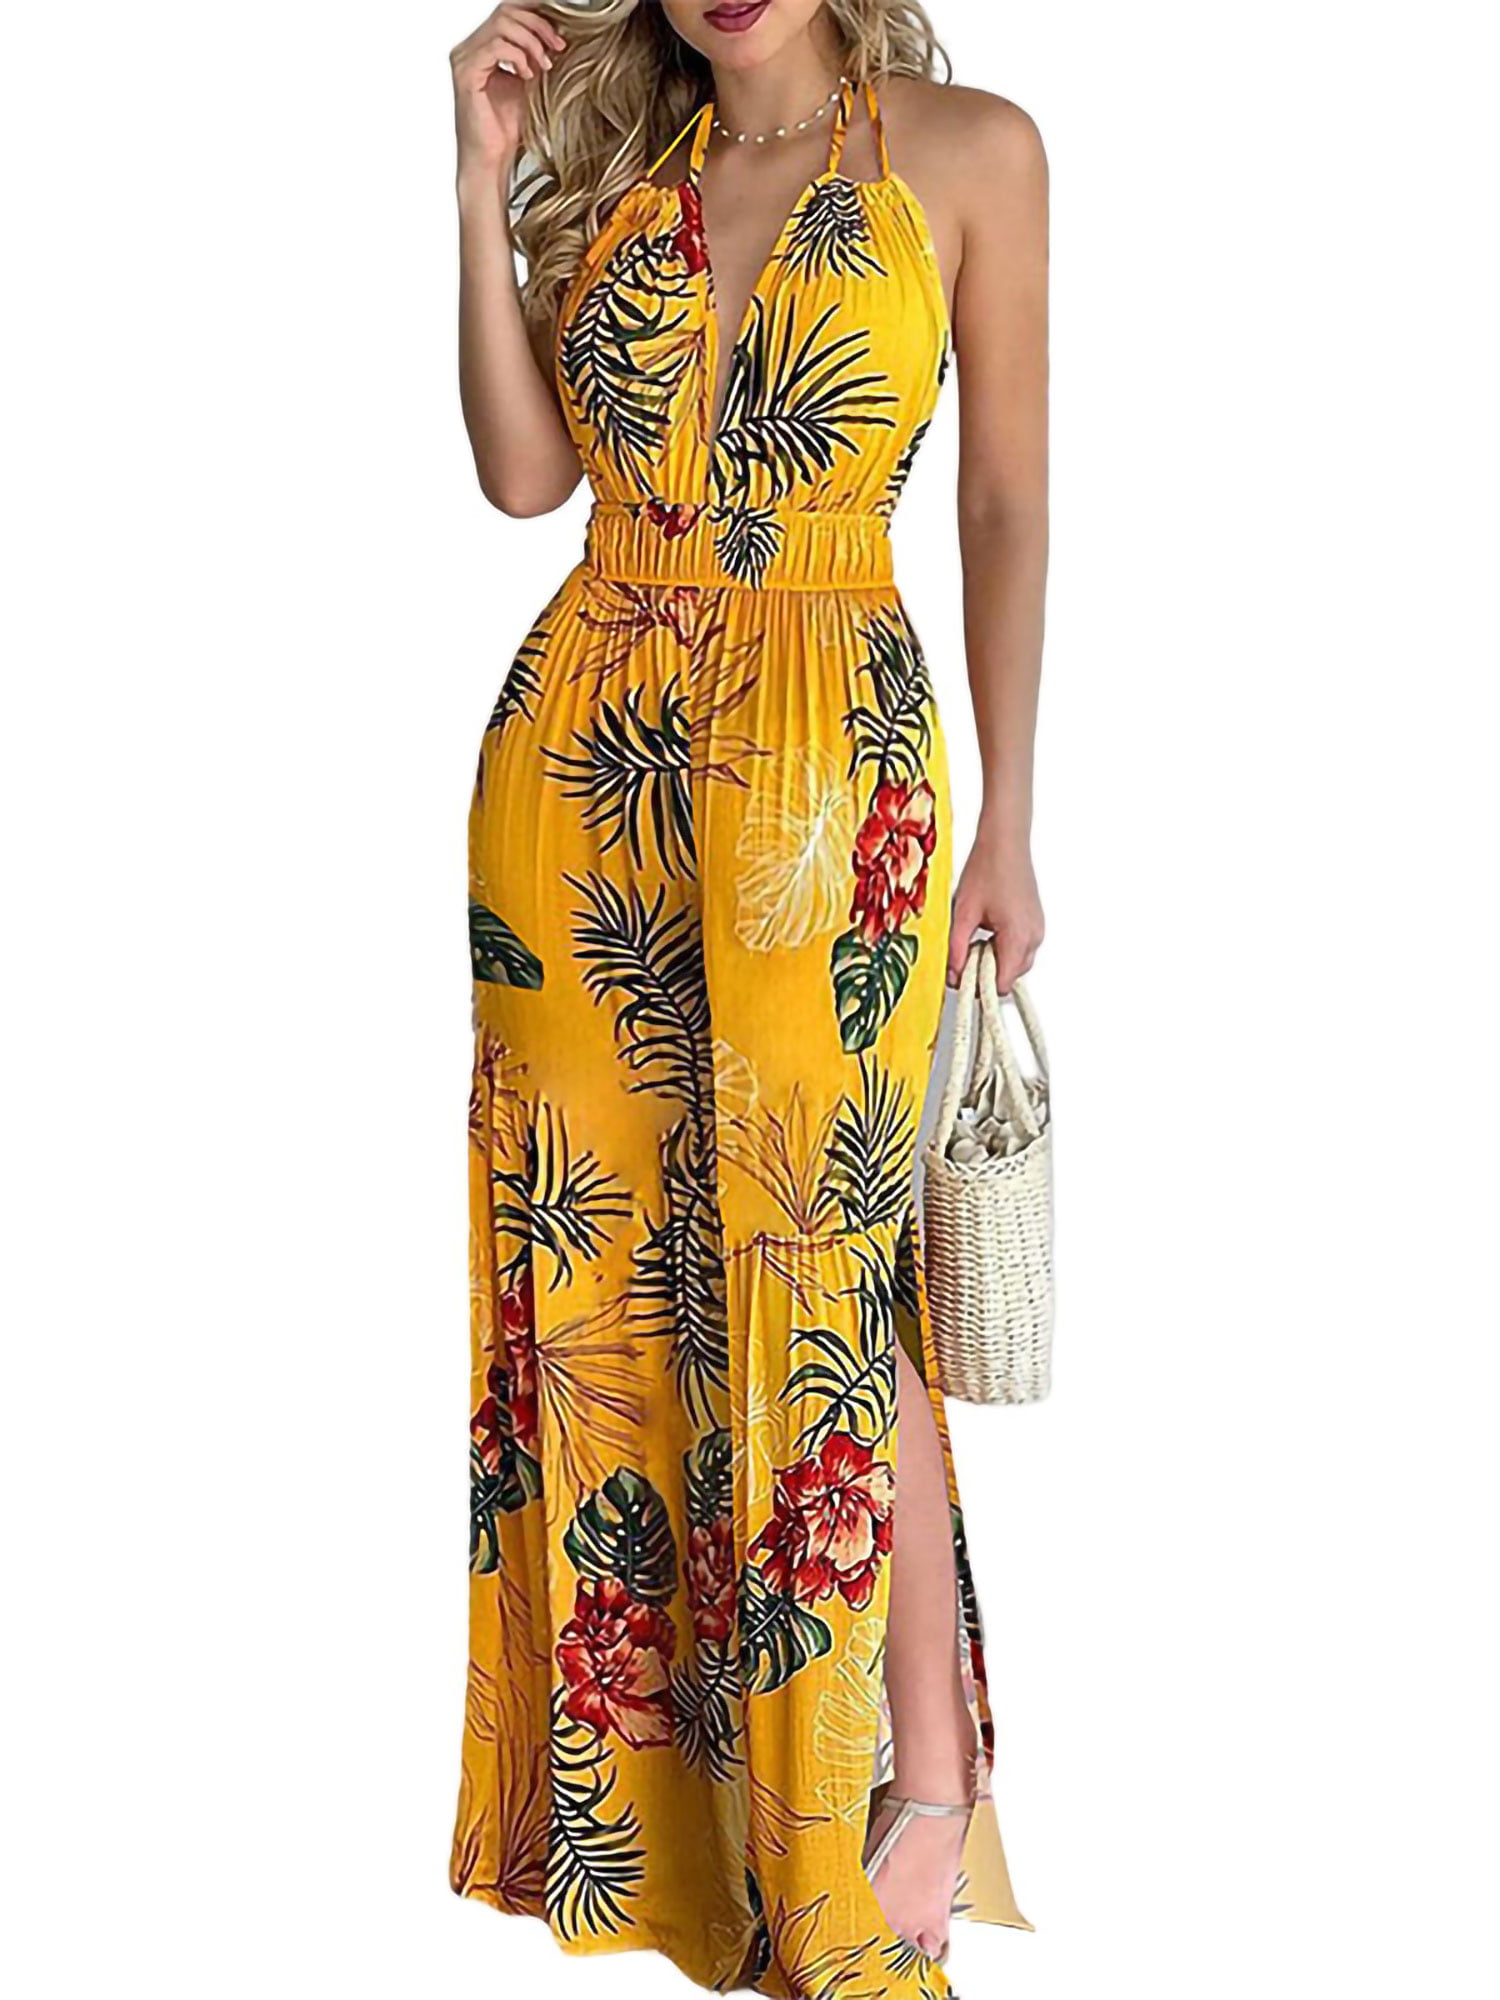 Jmwss QD Womens Summer V Neck Floral Printed Spaghetti Strap Sleeveless Jumpsuit Rompers